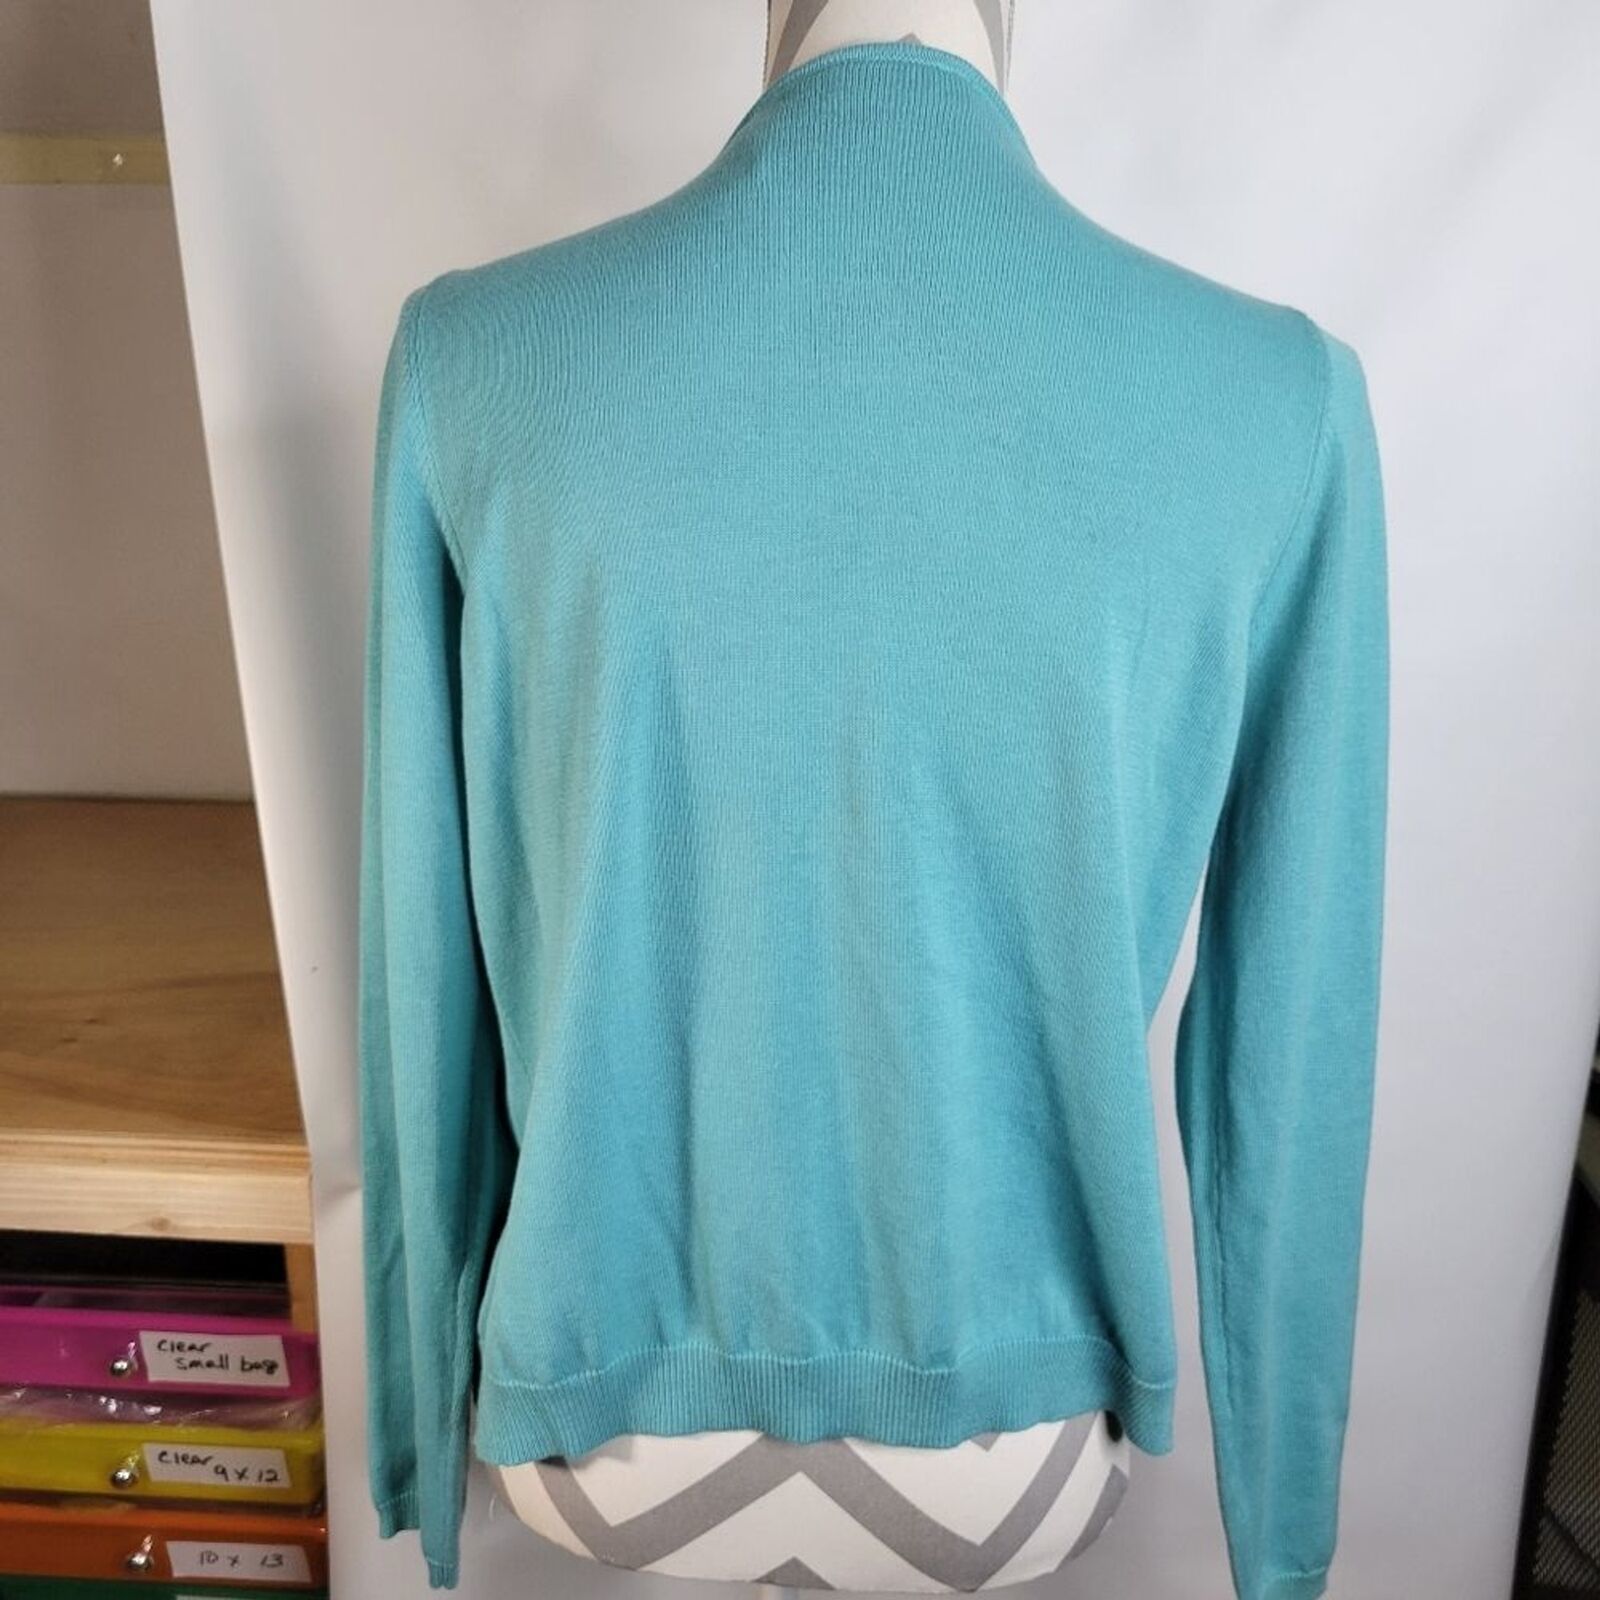 Primary image for Villager by Liz Claiborne Teal Cotton Blend Beaded Short Cardigan Size M Y2K/90s